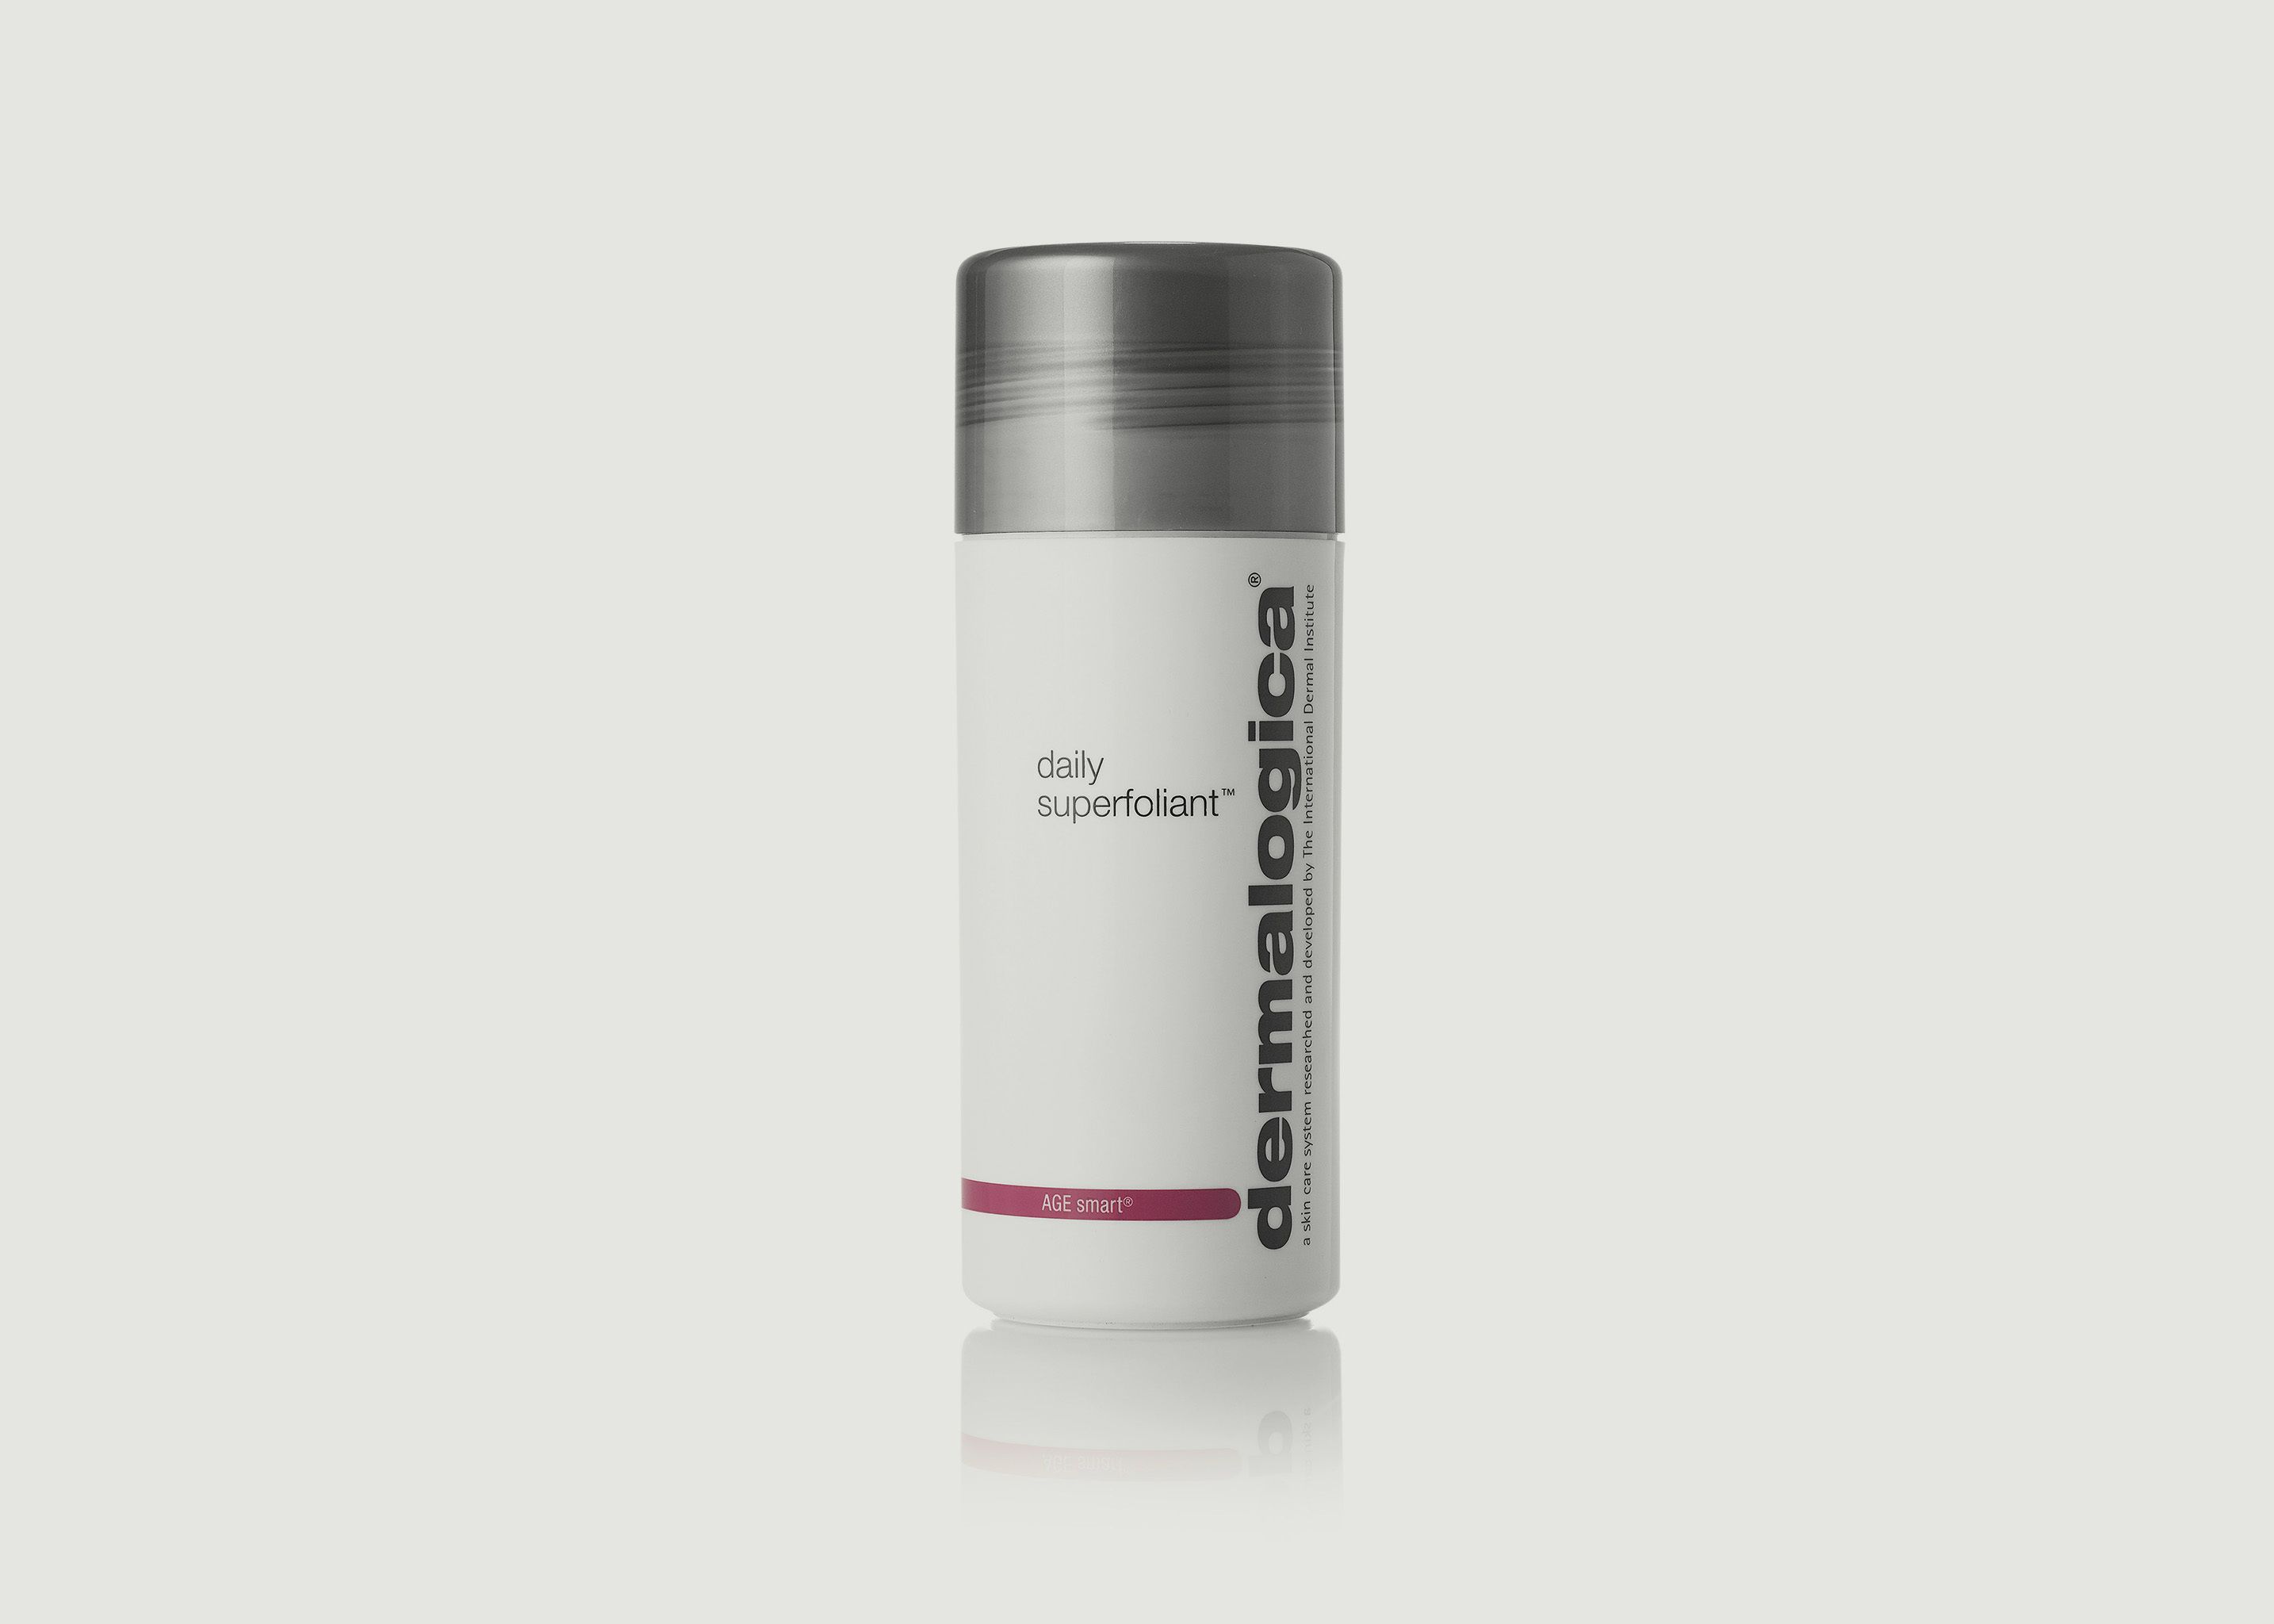 Daily superfoliant 57g - Dermalogica